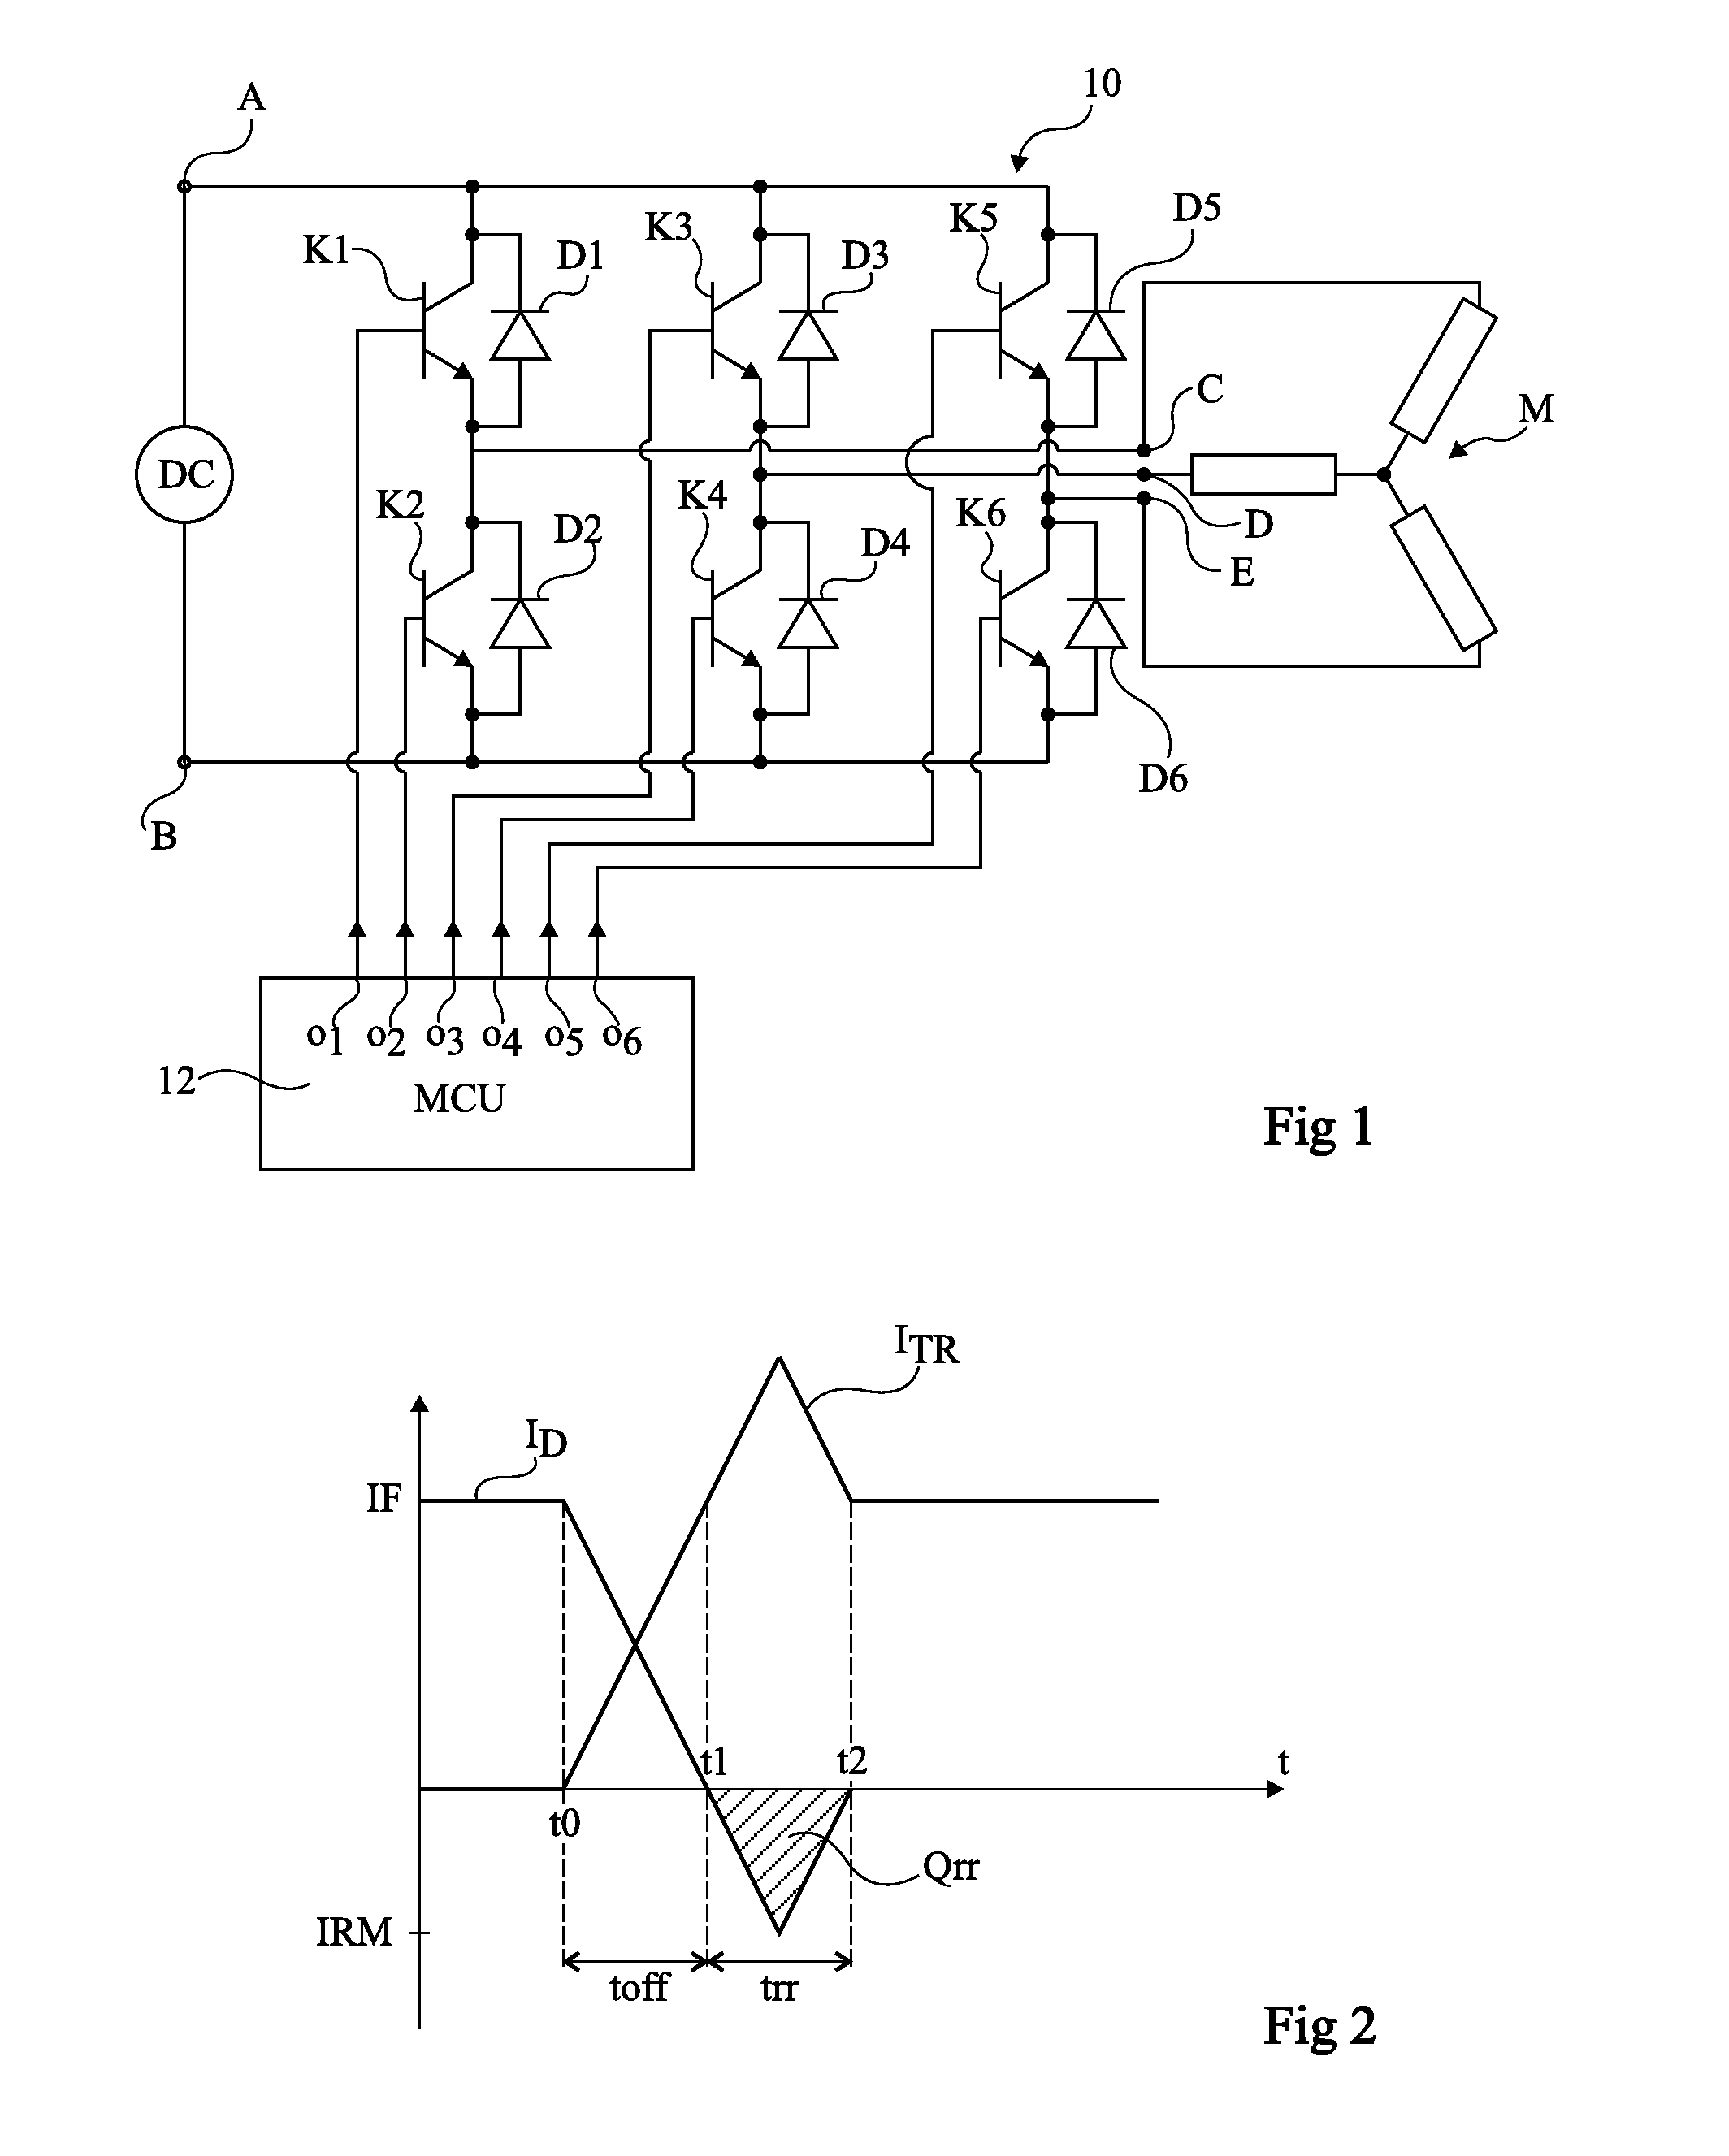 Control of a Switch in a Power Converter